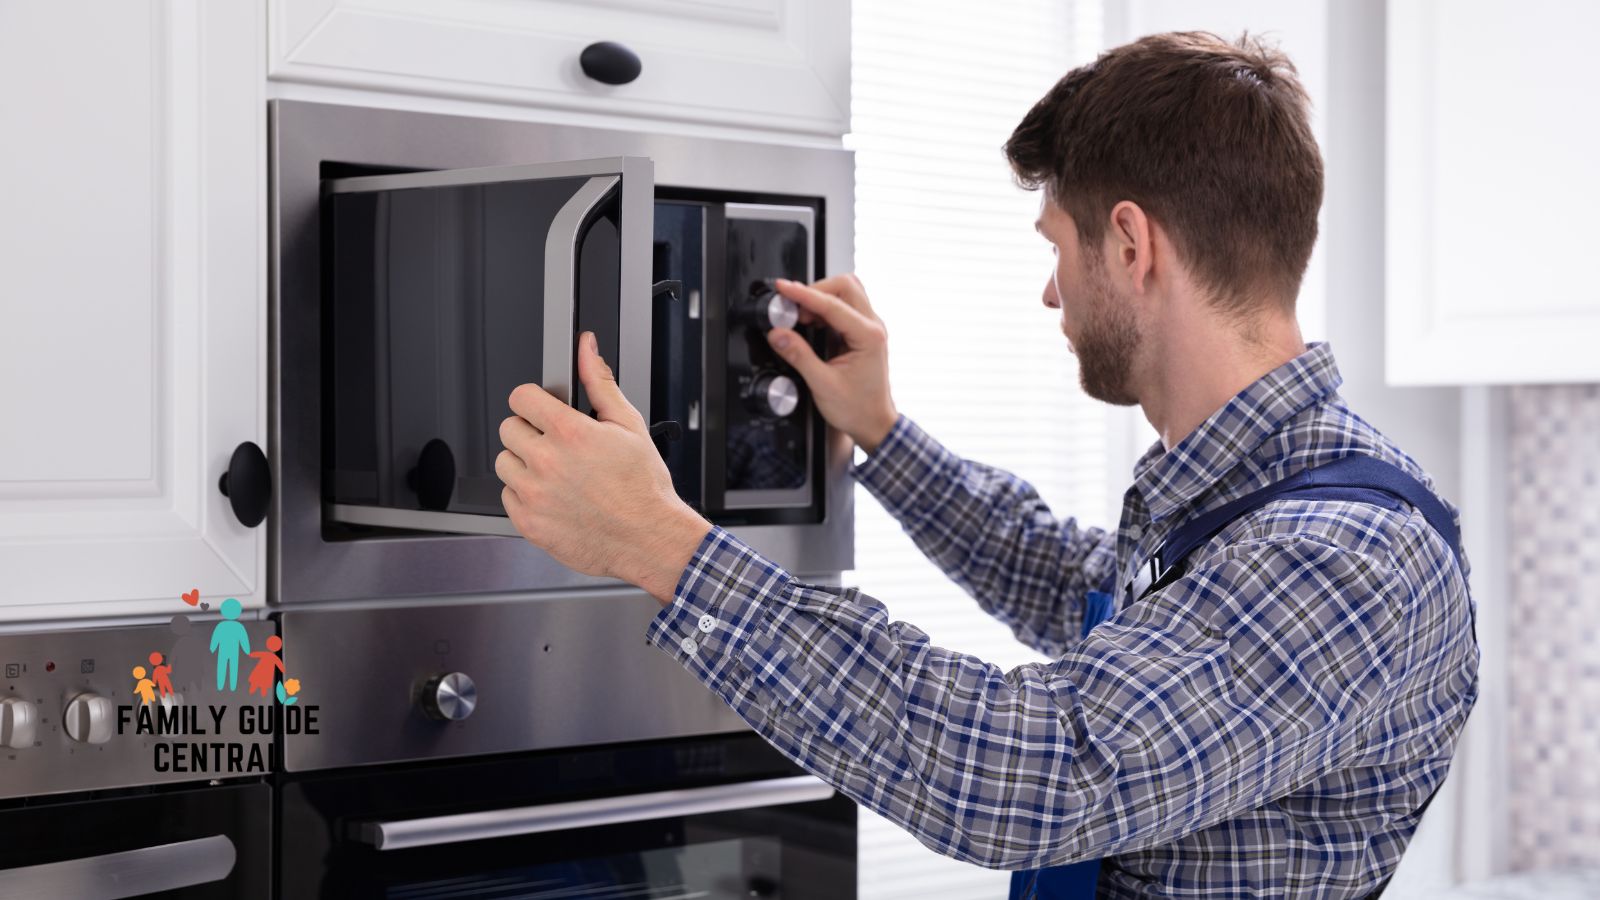 Man muting a microwave - familyguidecentral.com